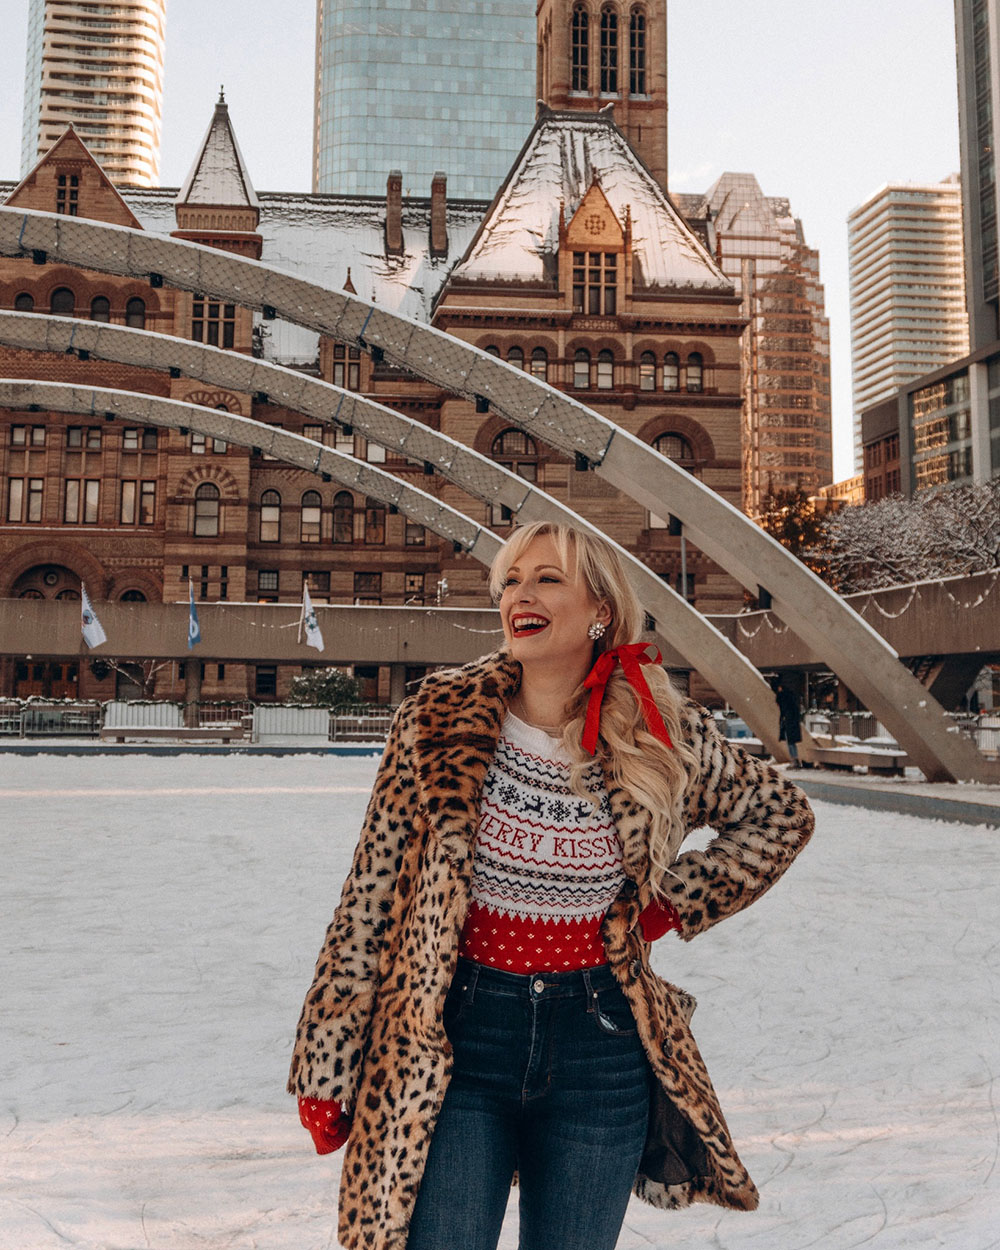 Looking for some fun things to do at Christmas in Toronto this holiday season? This guide is for you! Toronto has so many incredibly fun & festive activities to do during the Christmas season. From festive pop up bars to family friendly fun, this guide has you covered to get the most out of the Christmas season in Toronto! Pictured here: Skating at Nathan Phillips Square